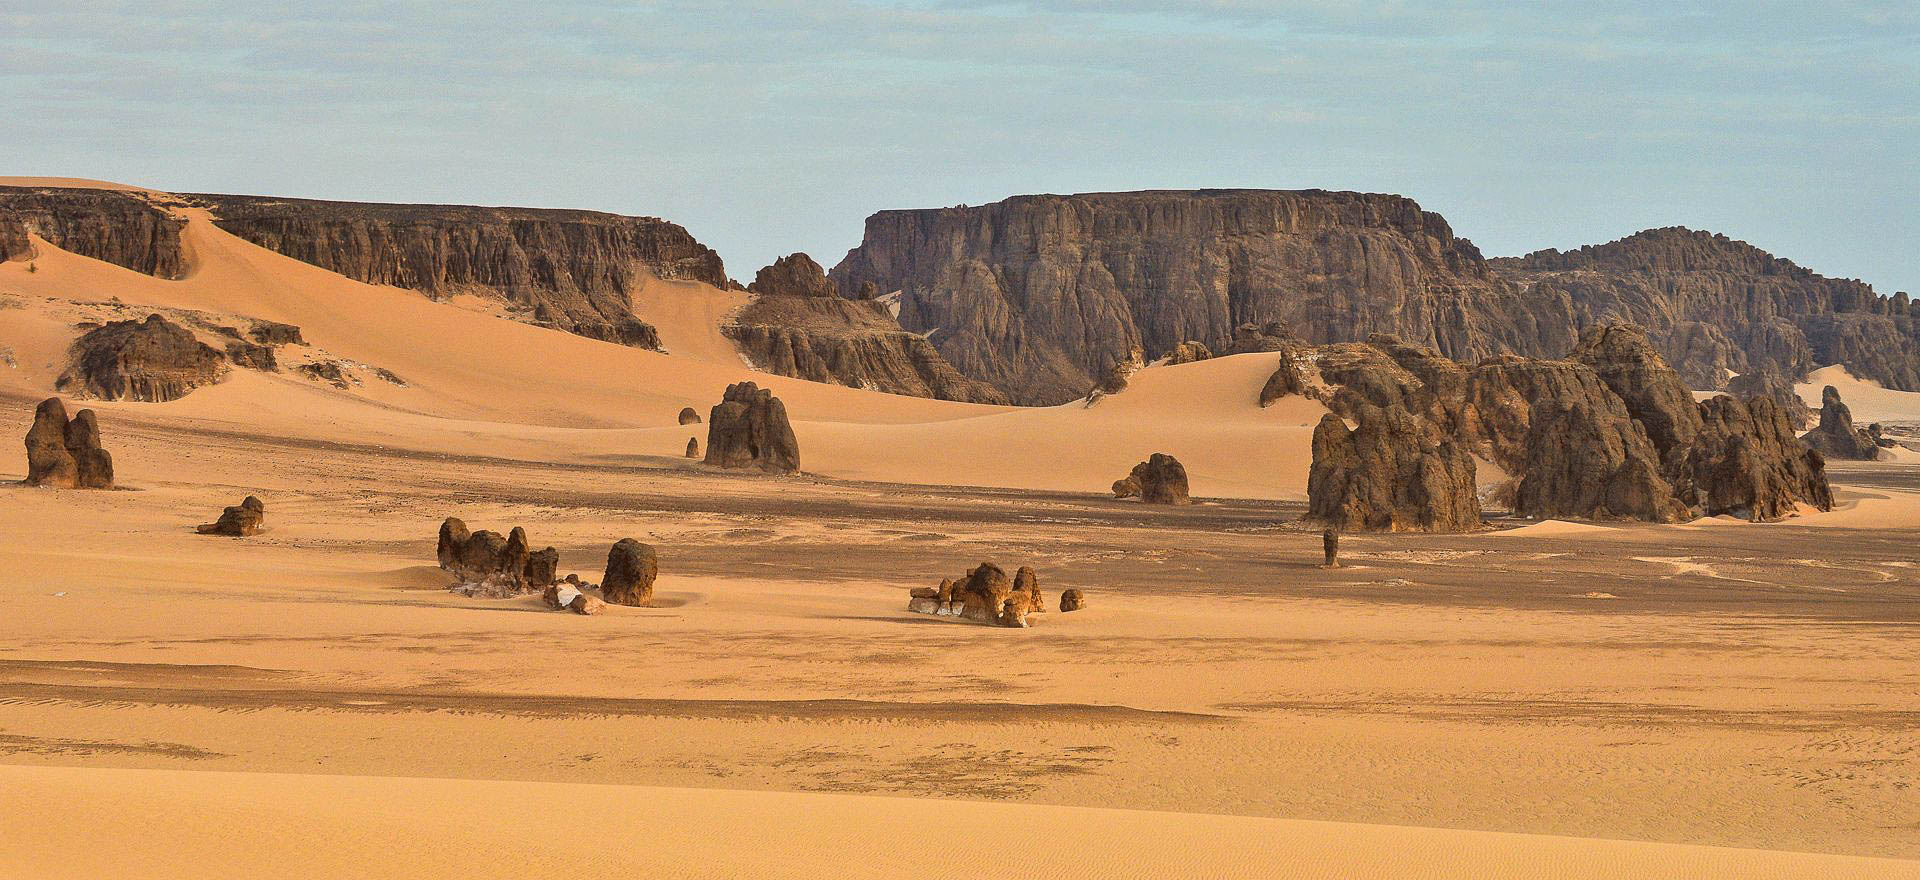 Landscape in the Ennedi Mountains - Chad tours and holidays